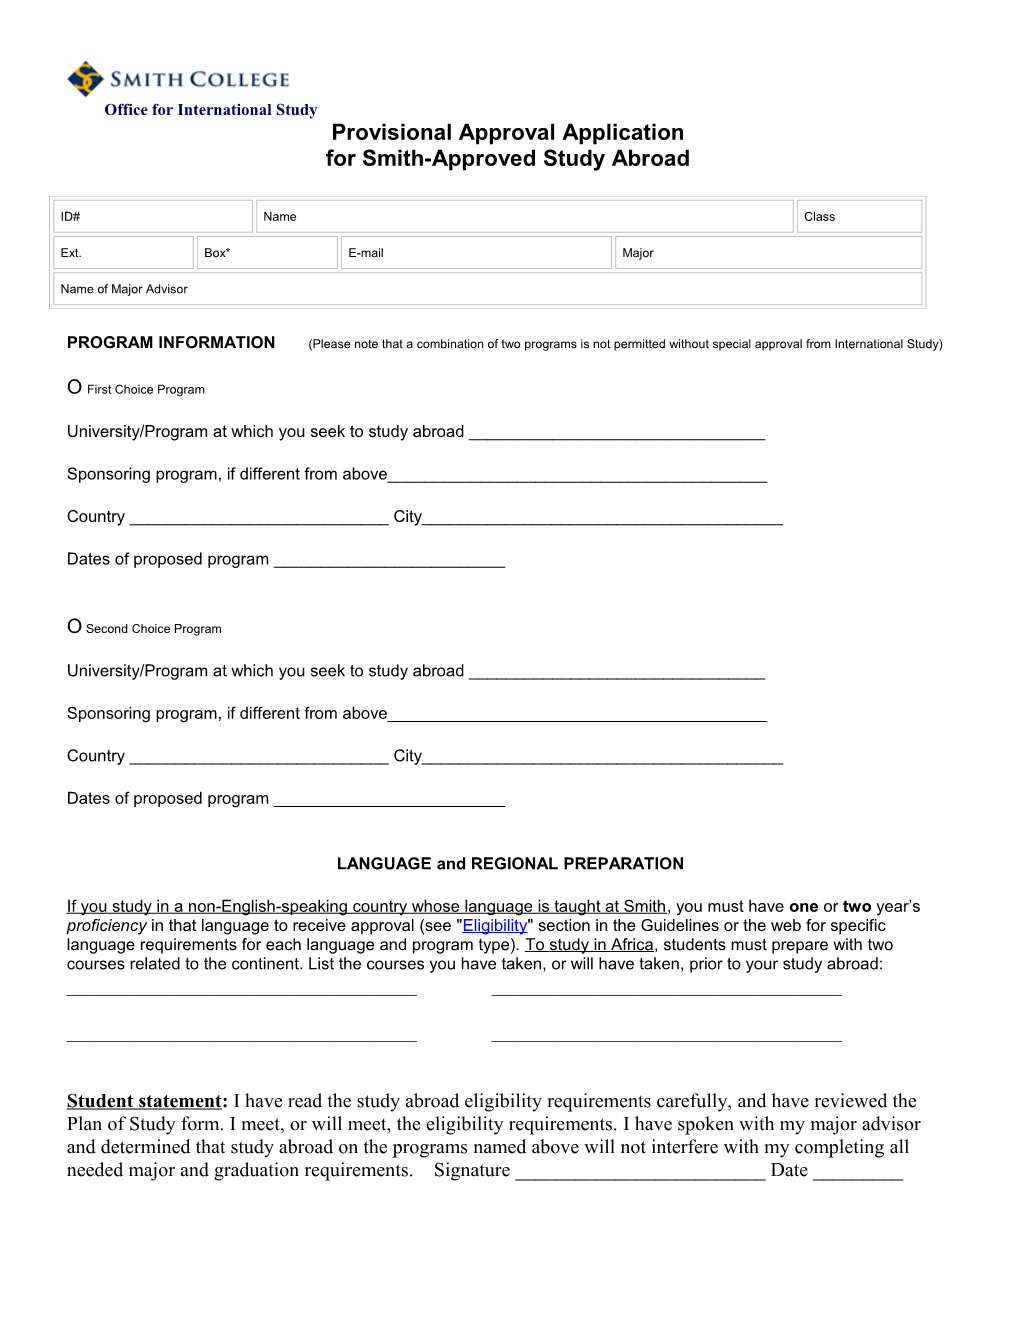 Provisional Approval Application for Smith-Approved Study Abroad